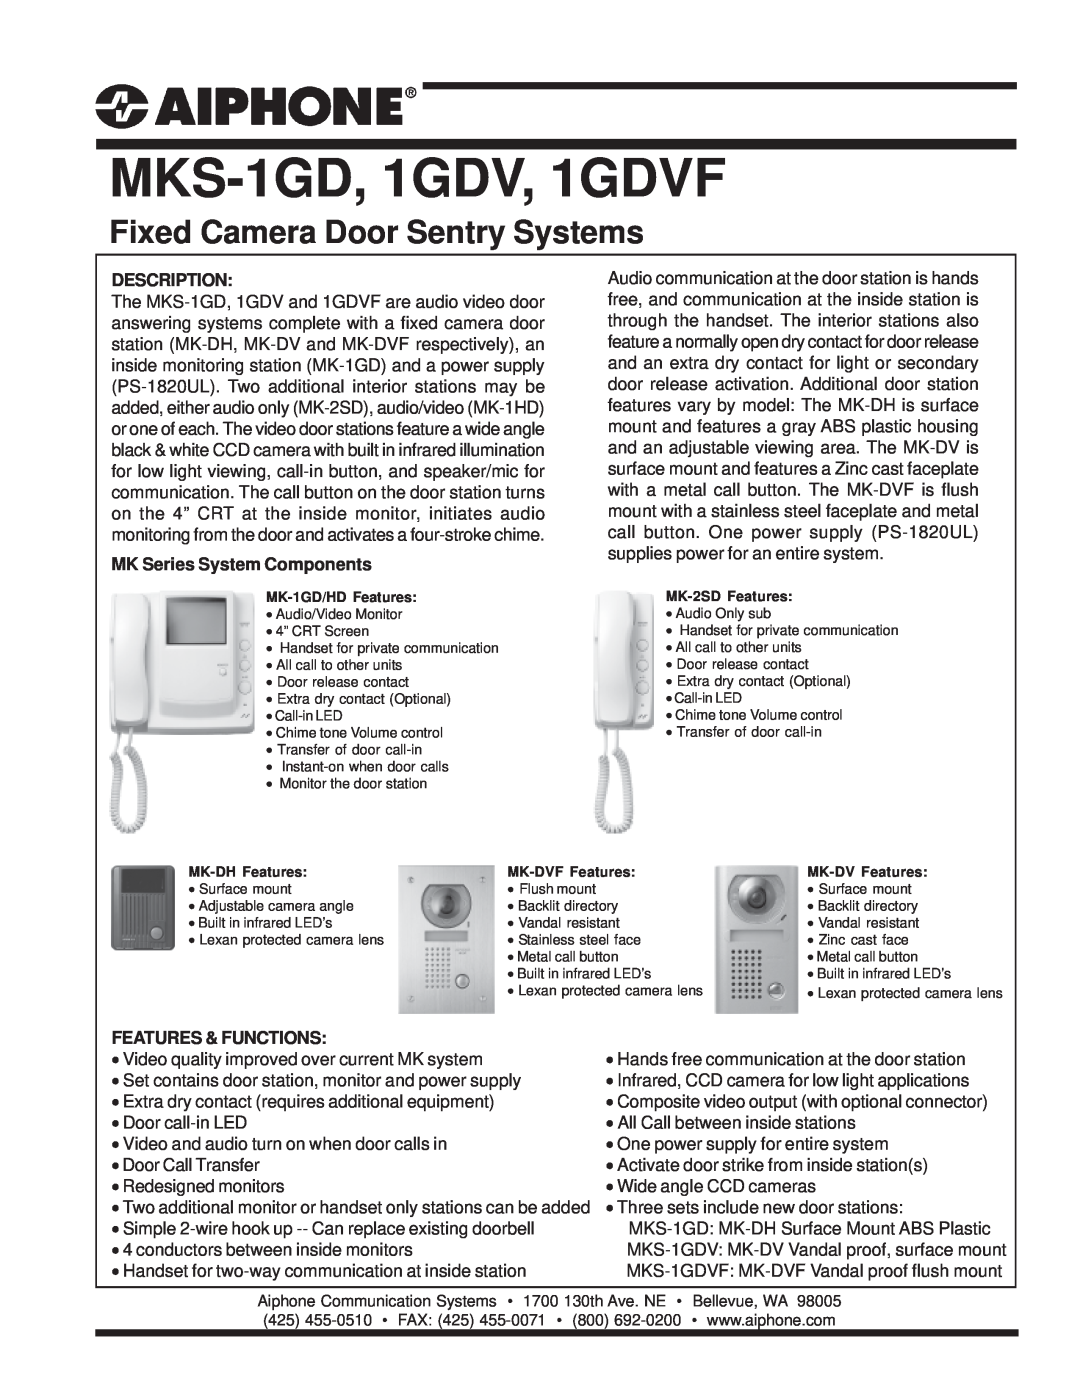 Aiphone manual Description, MK Series System Components, Features & Functions, MKS-1GD,1GDV, 1GDVF 